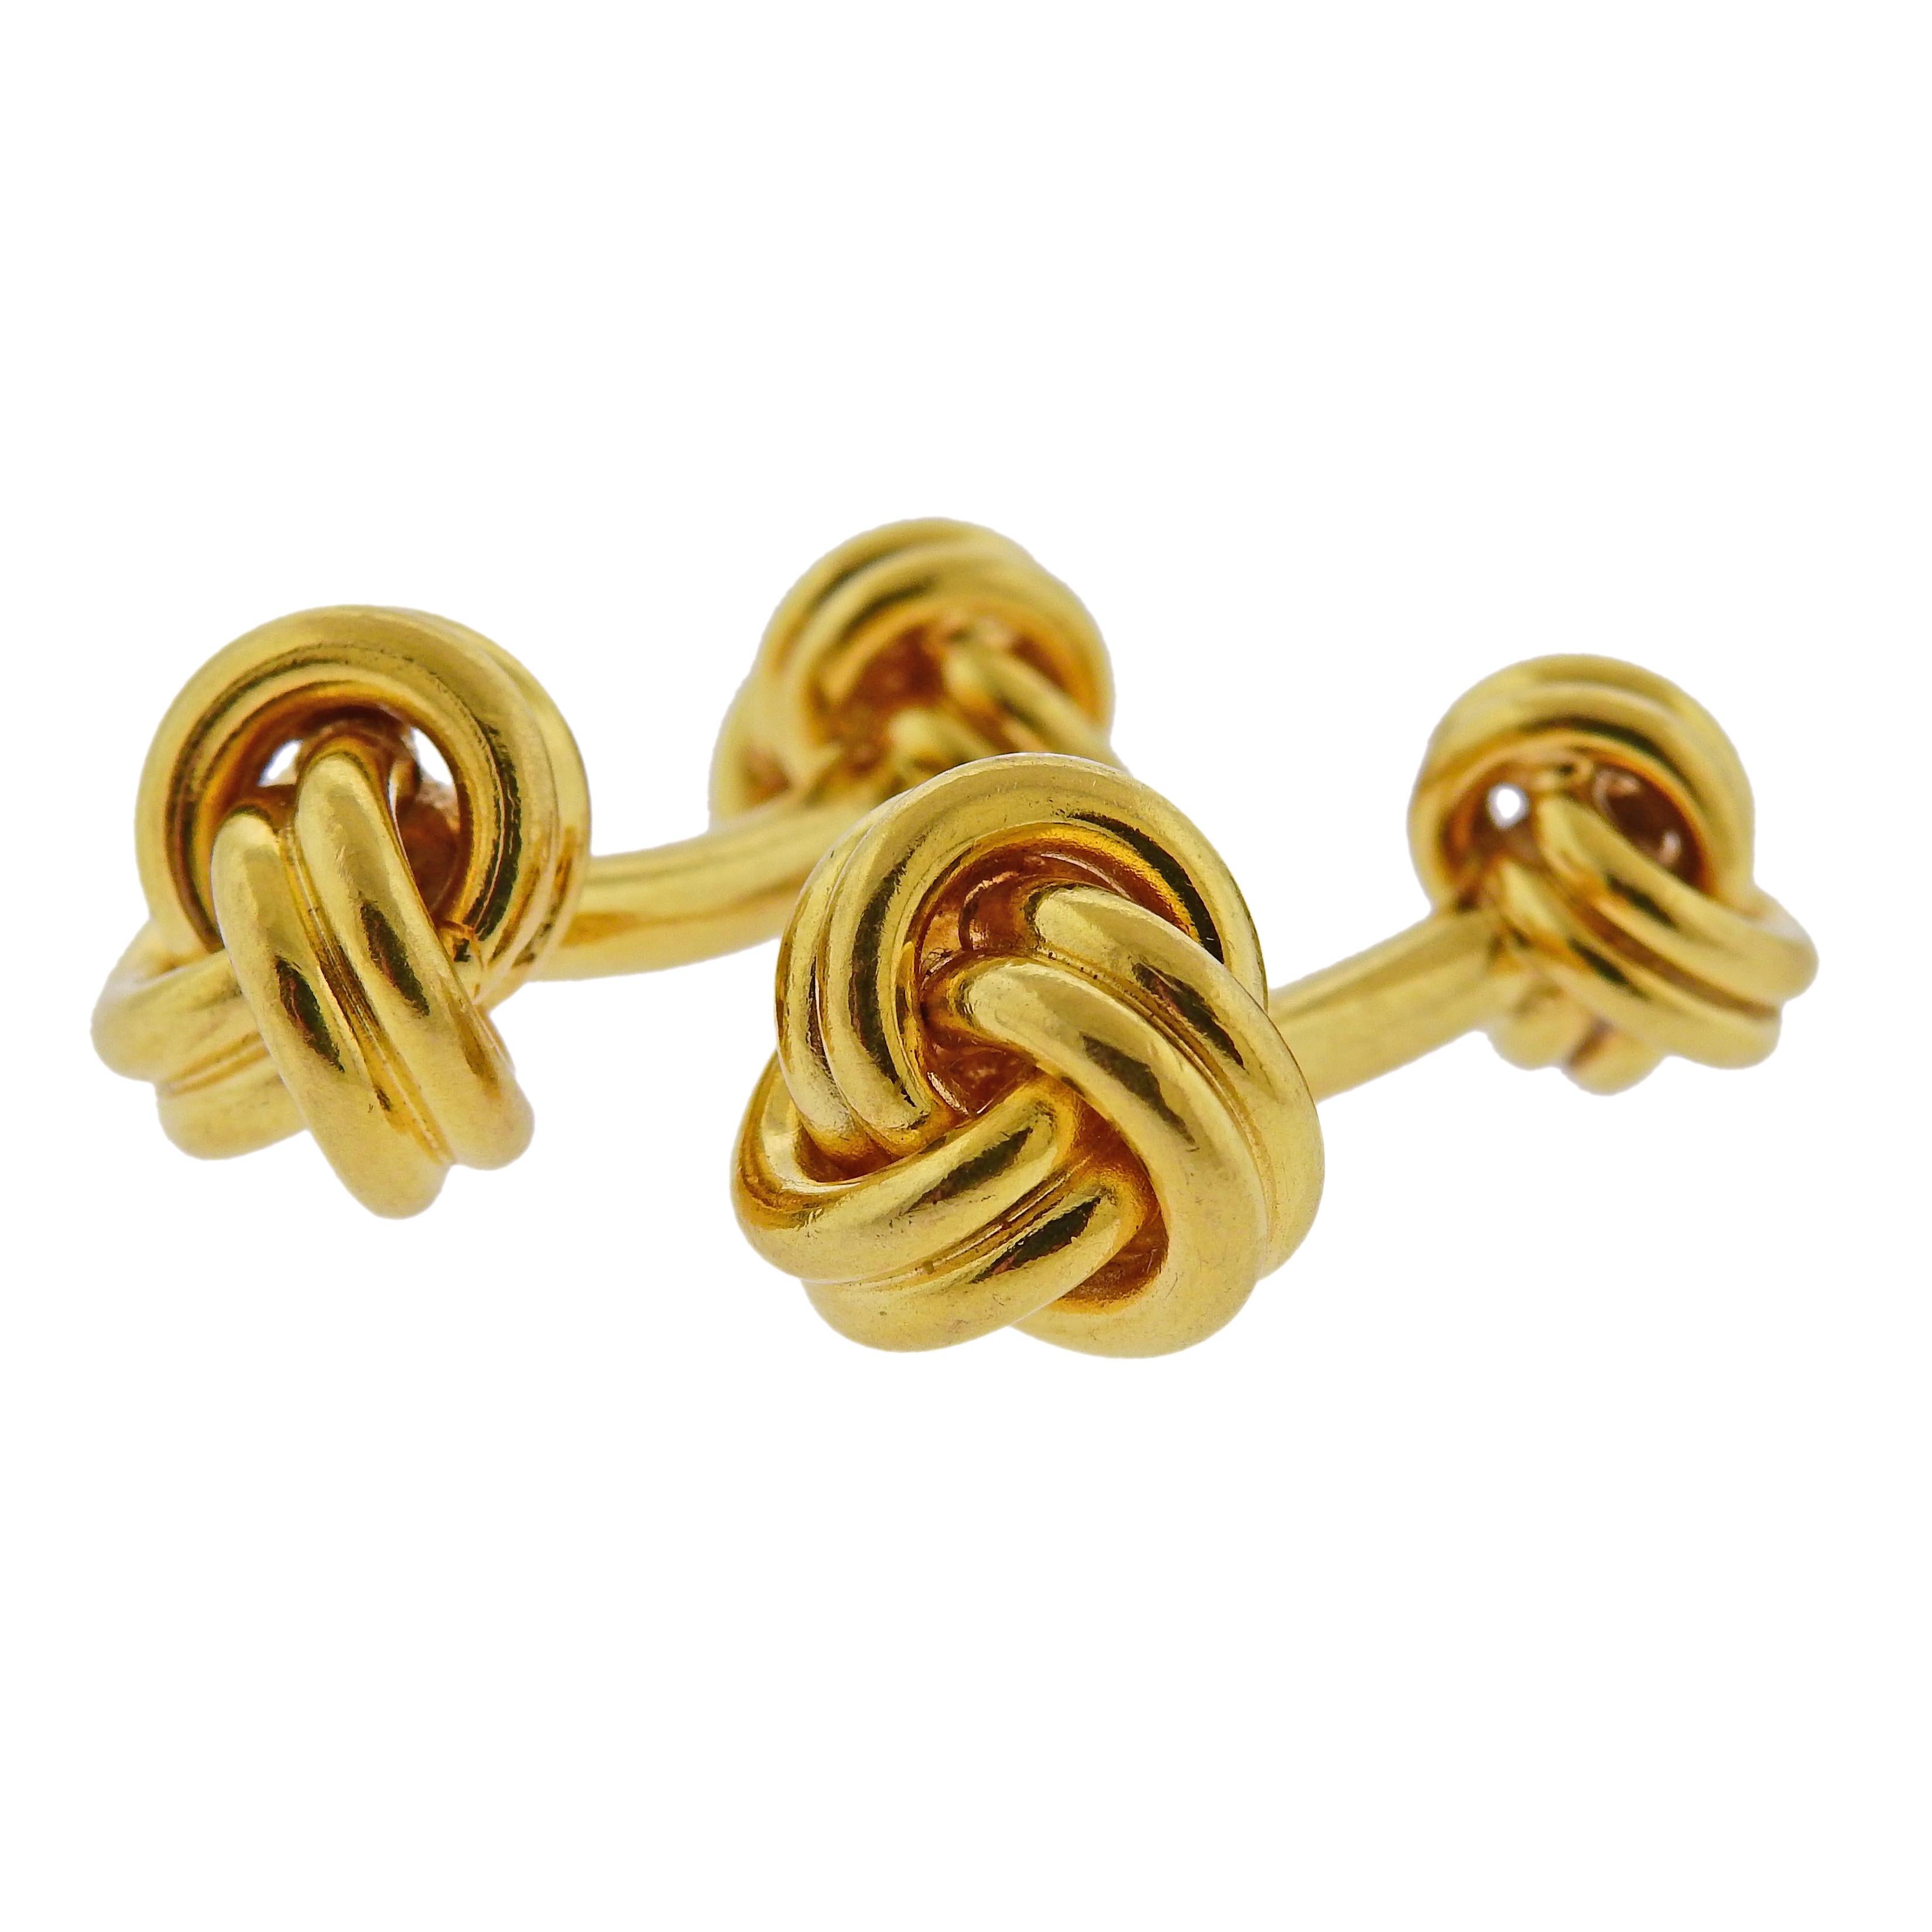 Tiffany & Co 18k gold double sided knot cufflinks. Top knot is 14mm x 13mm, small knot 11mm x 10mm. Marked Tiffany & Co,750. weight 26.7g